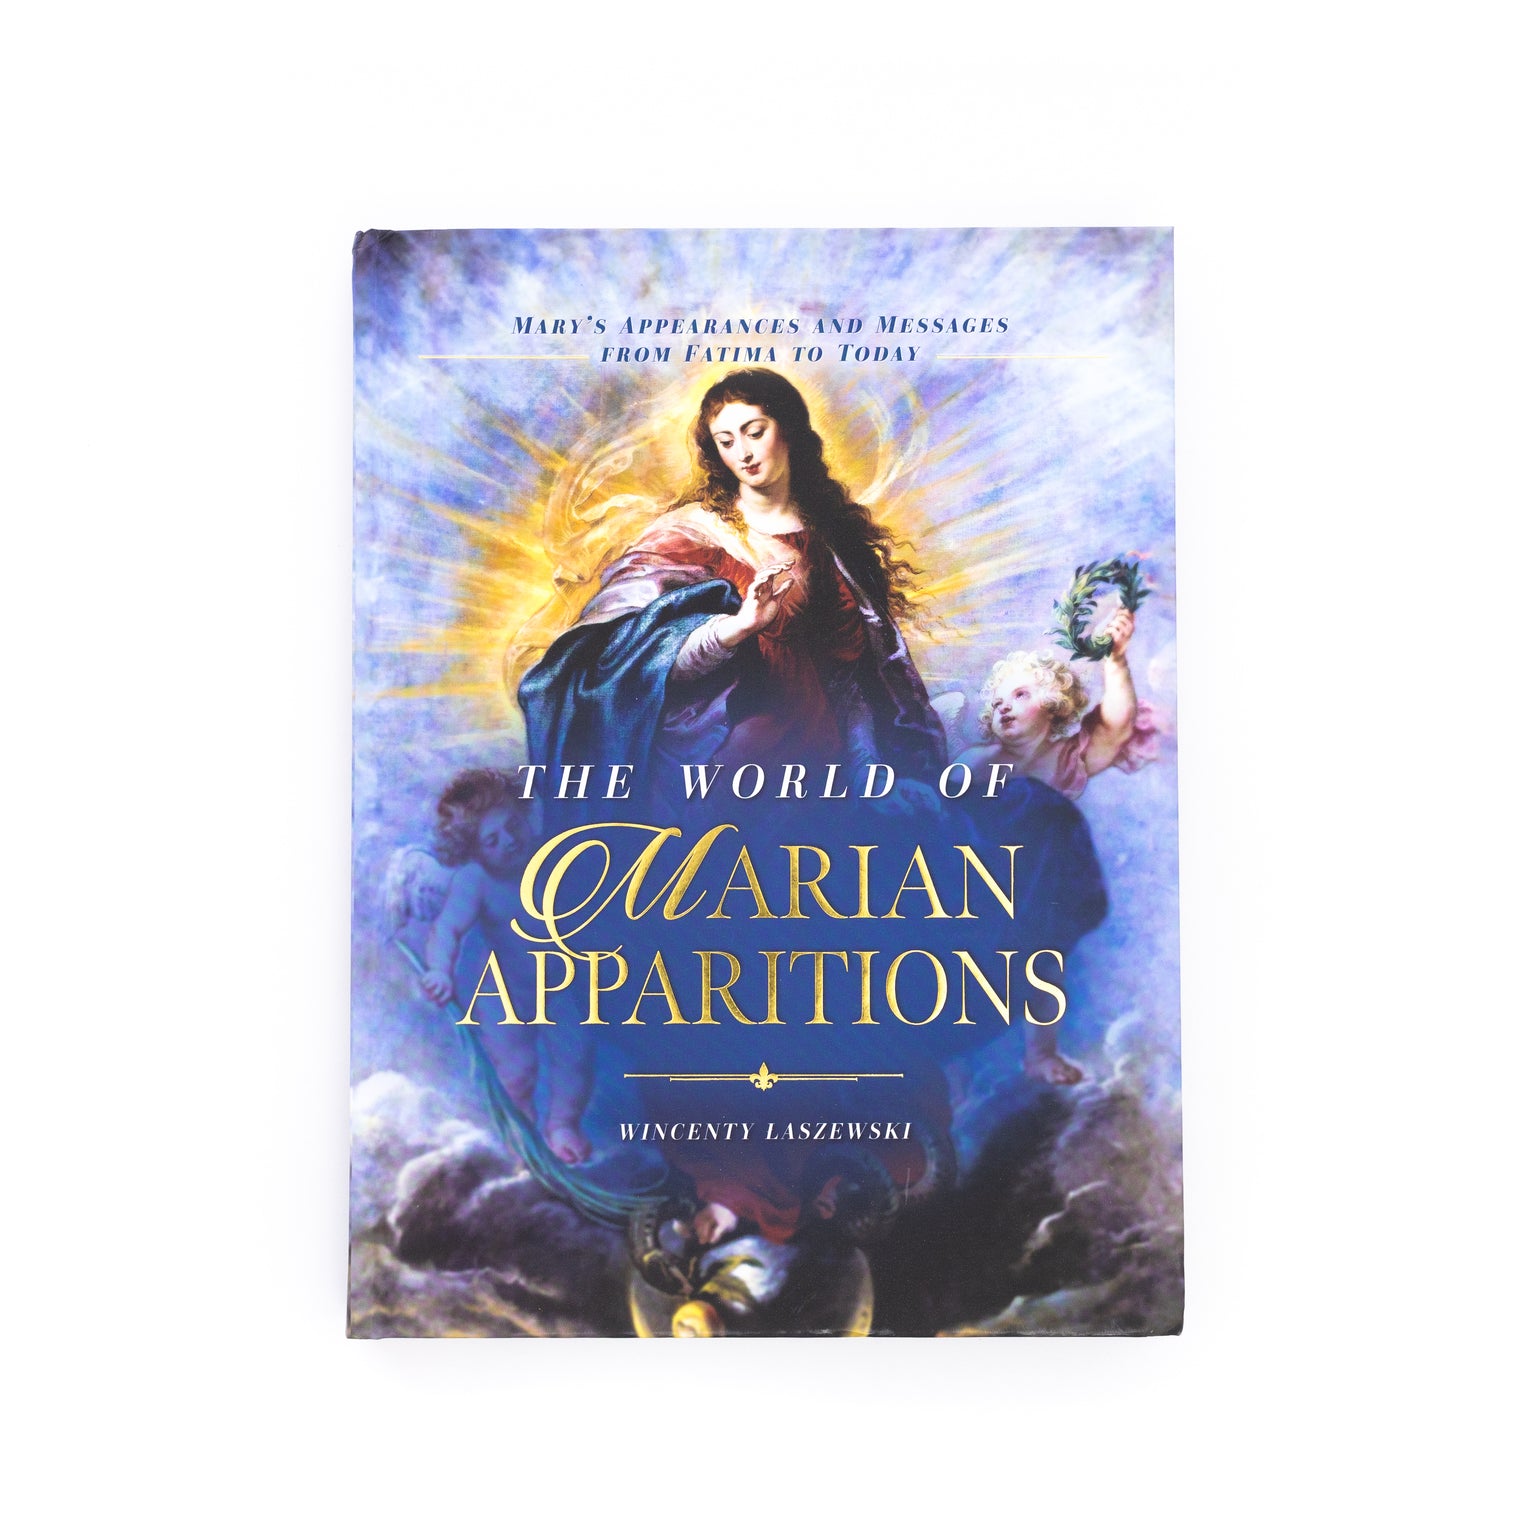 The World of Marian Apparitions